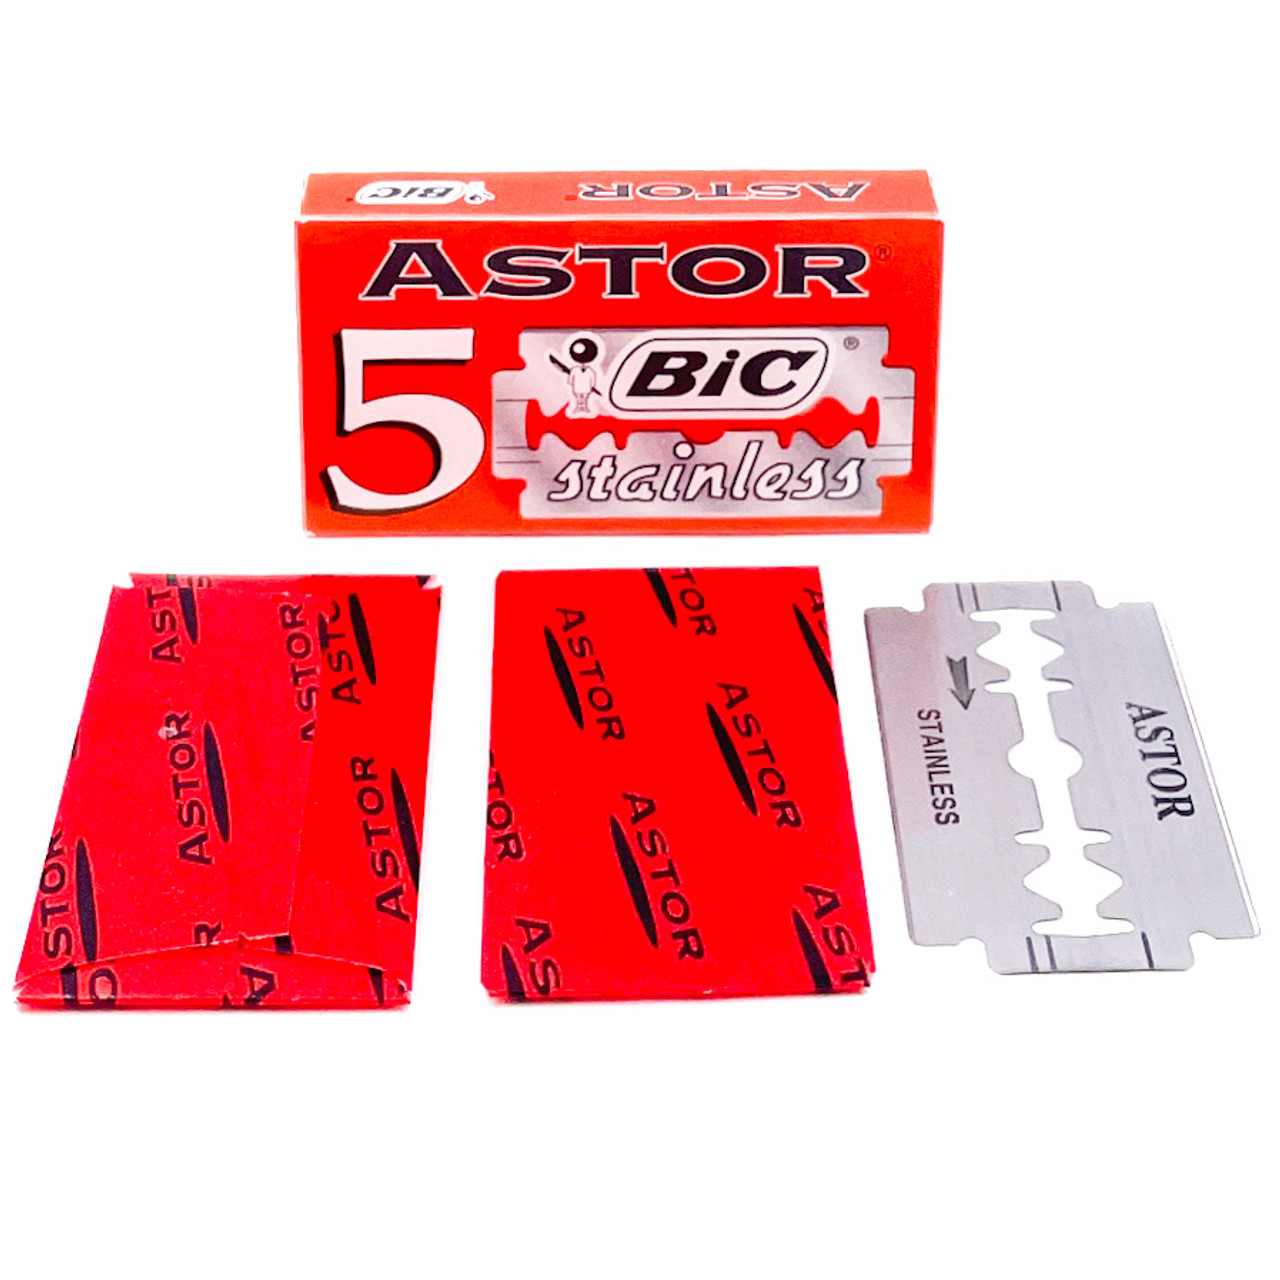 Bic Astor Stainless Double Edge Safety Razor Blades - 5 Count